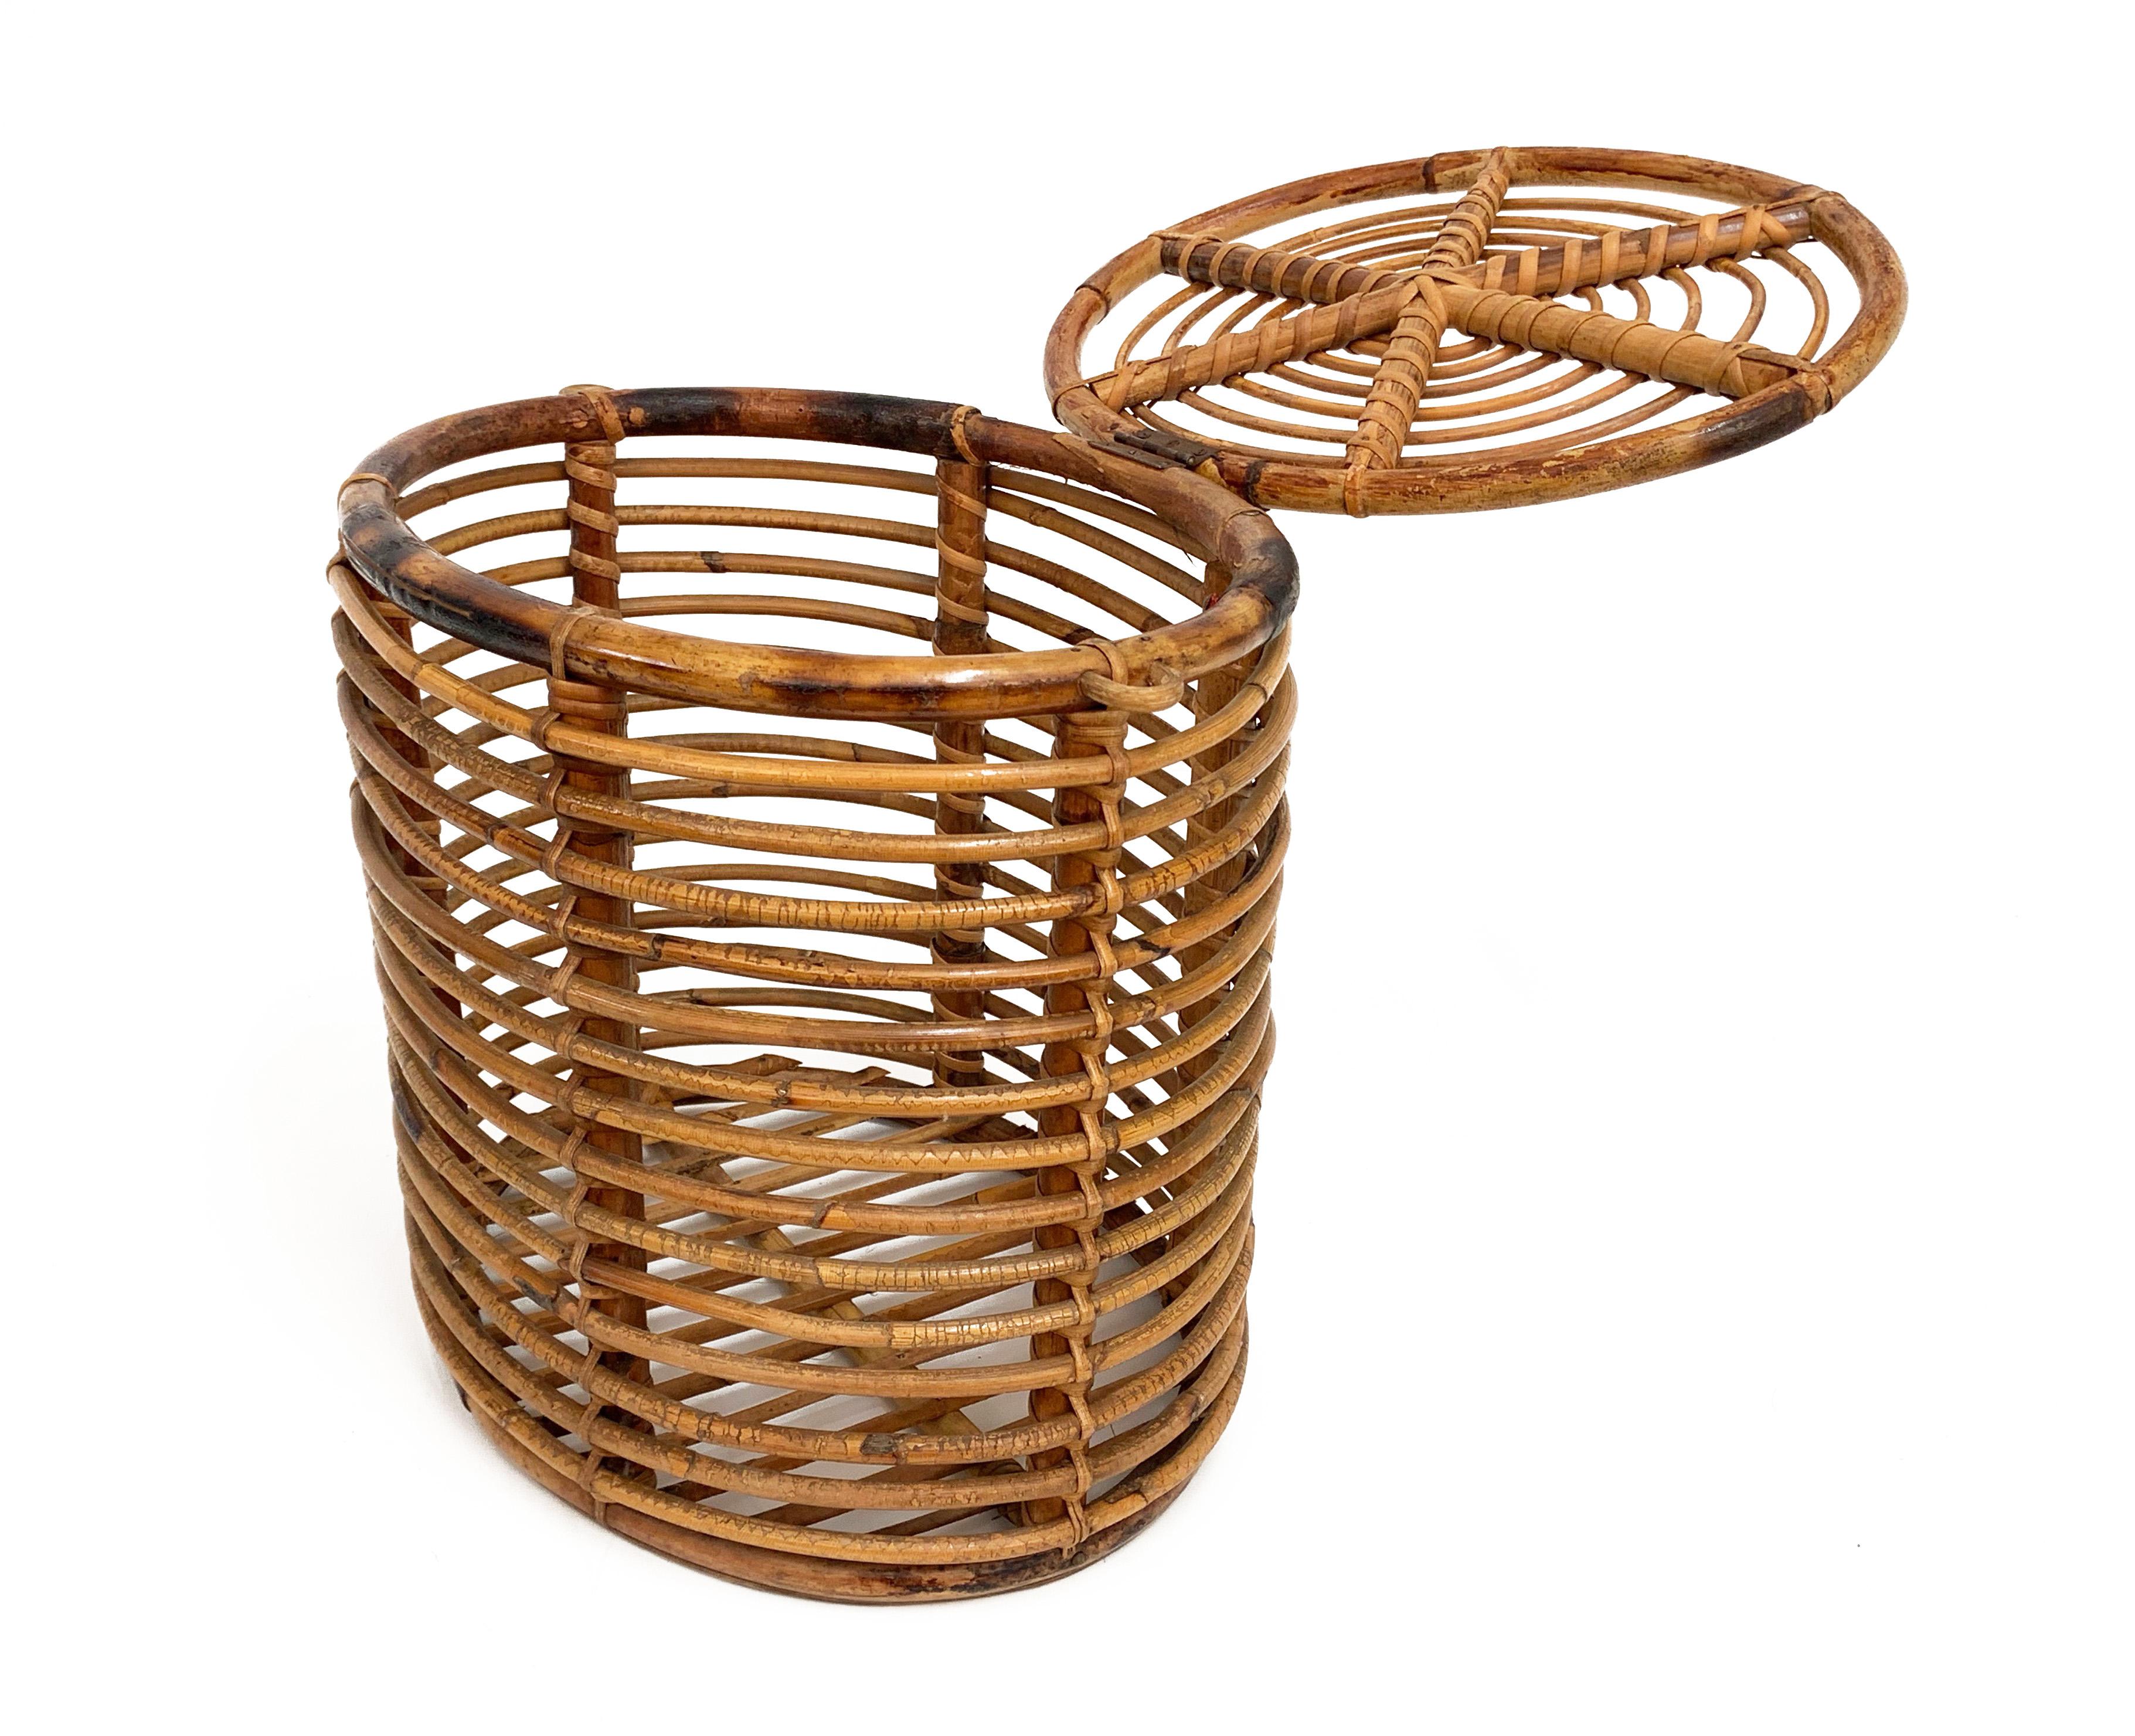 Beautiful midcentury oval bamboo and rattan container basket. This item is attributed was produced in Italy during 1950s.

This amazing piece has a round bamboo structure with finishes in rattan. The top of this basket is connected to the main